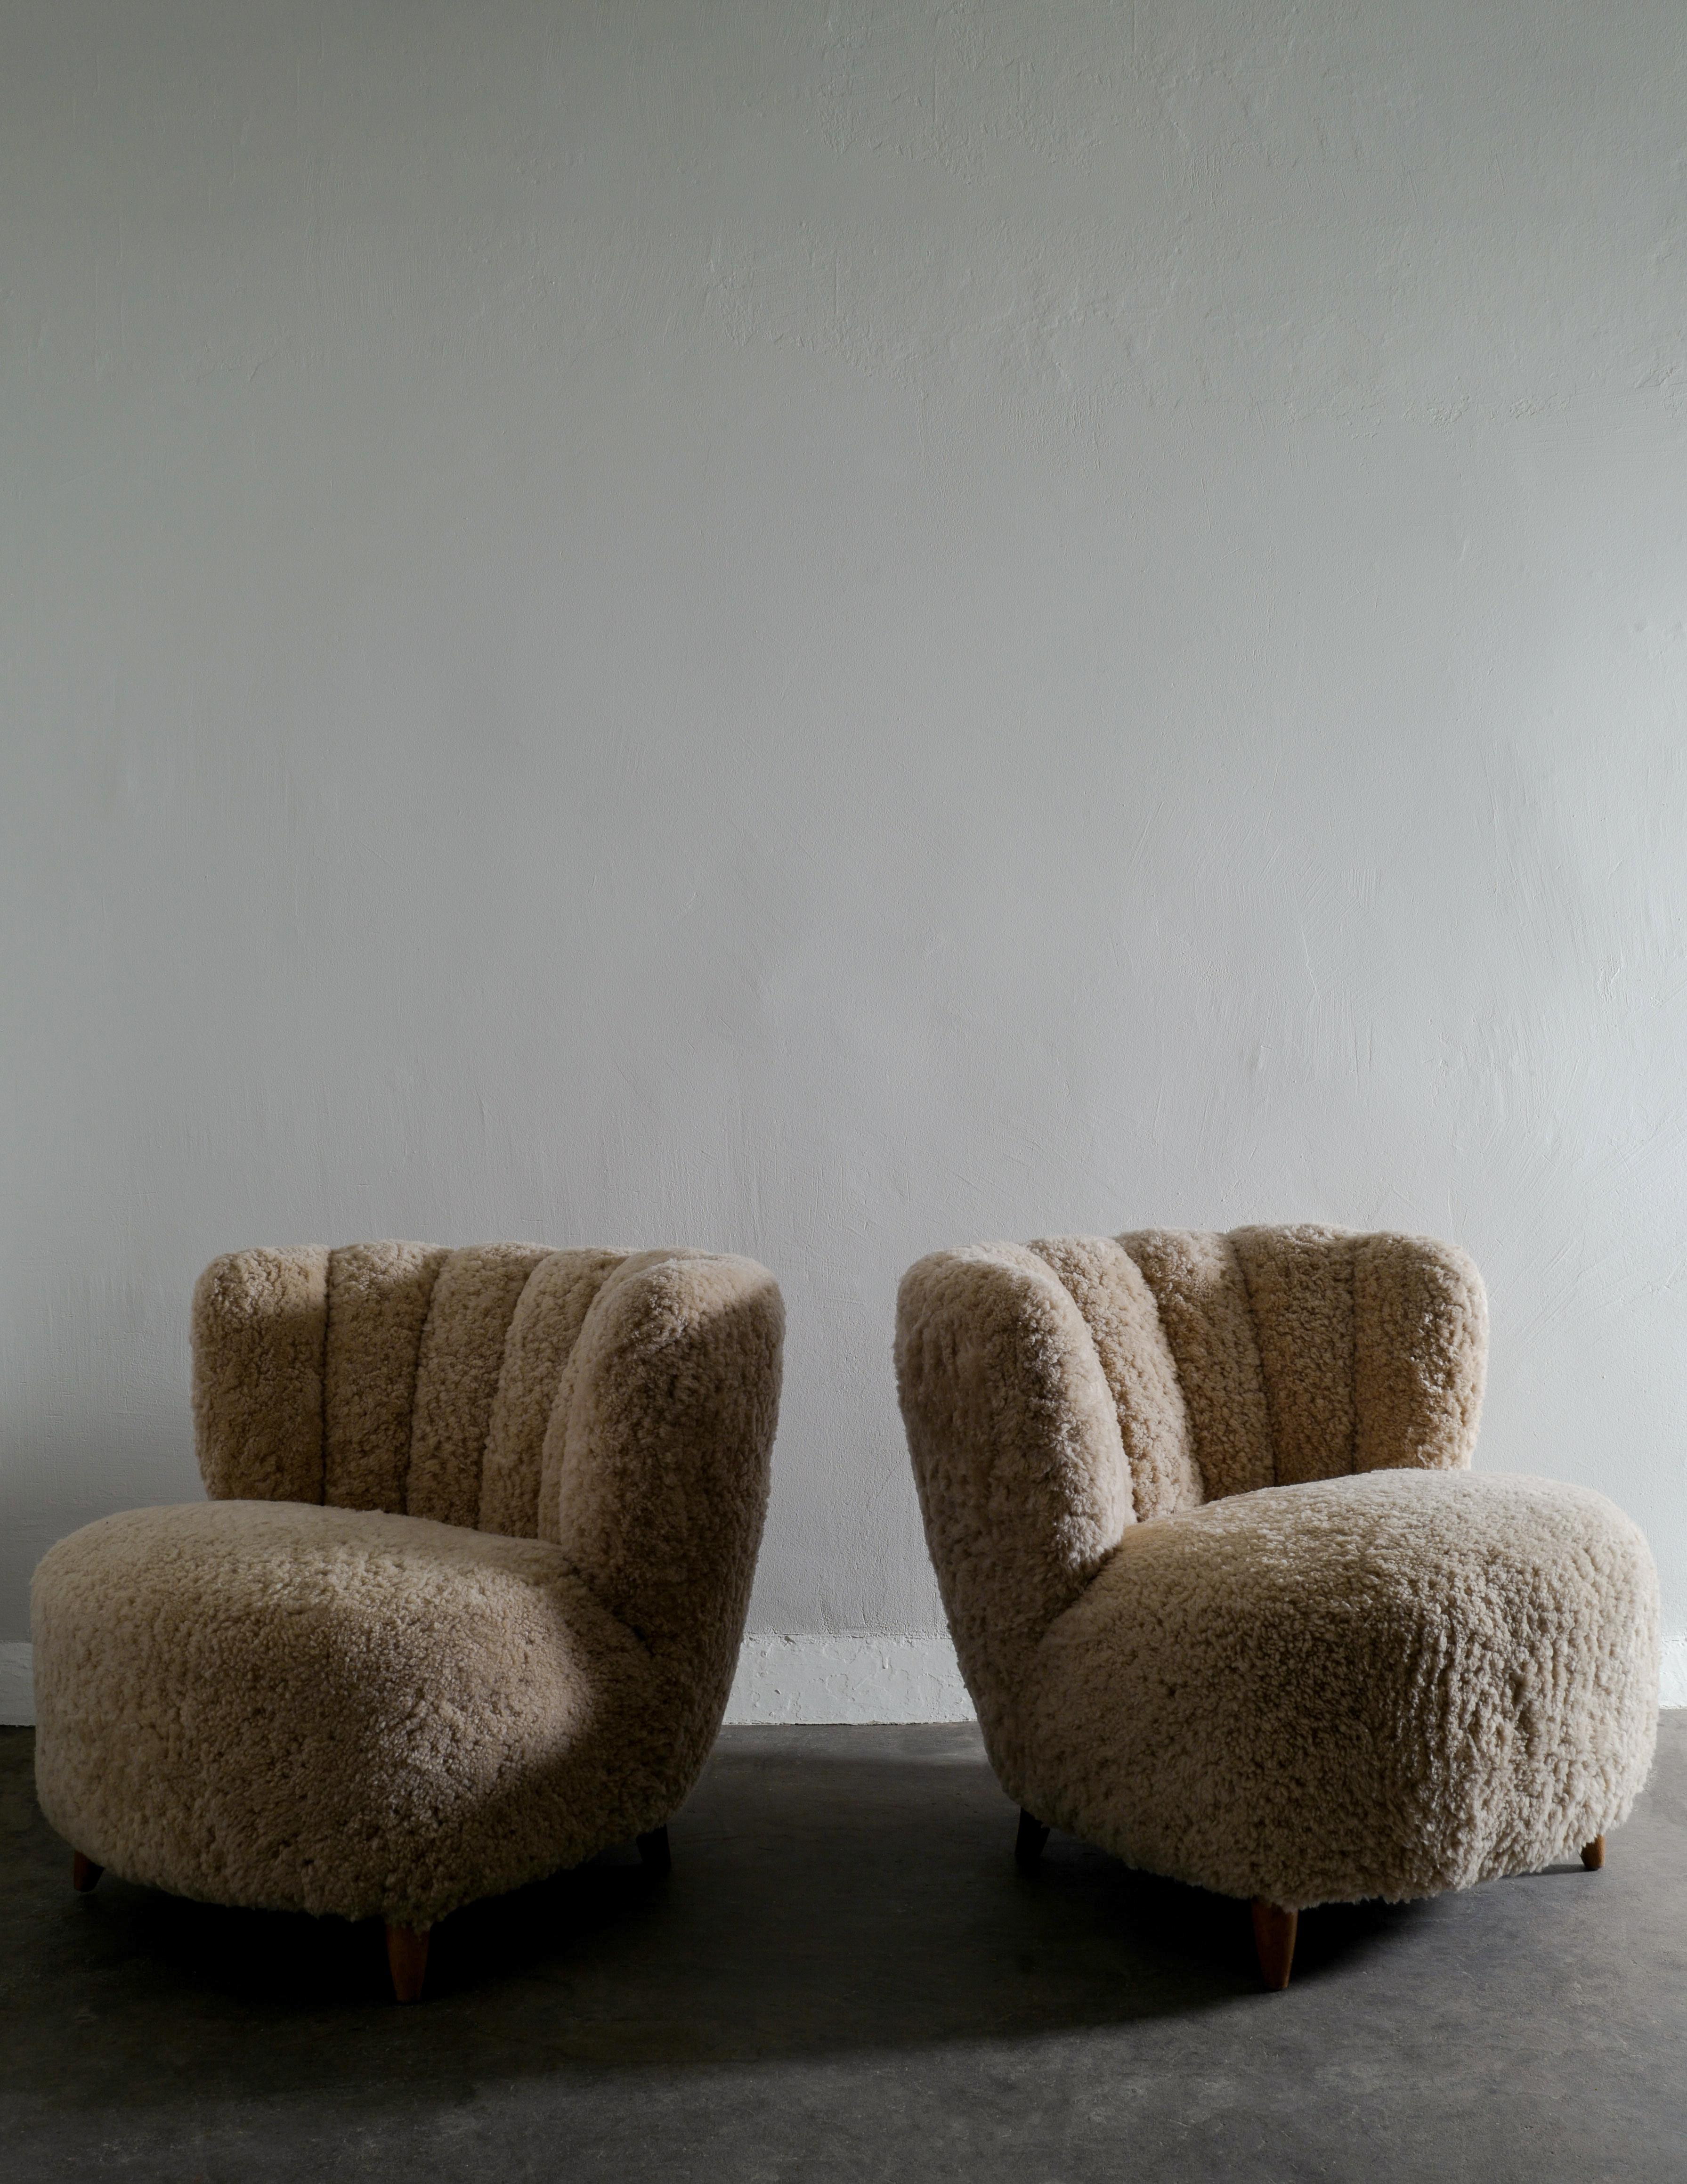 Rare pair of curved easy lounge chairs produced in Denmark in the 1940s and fully restored and upholstered with sheepskin by our professional. In great vintage condition with minimal signs from age and use.

Dimensions; H: 71 cm W: 80 cm D: 83 cm